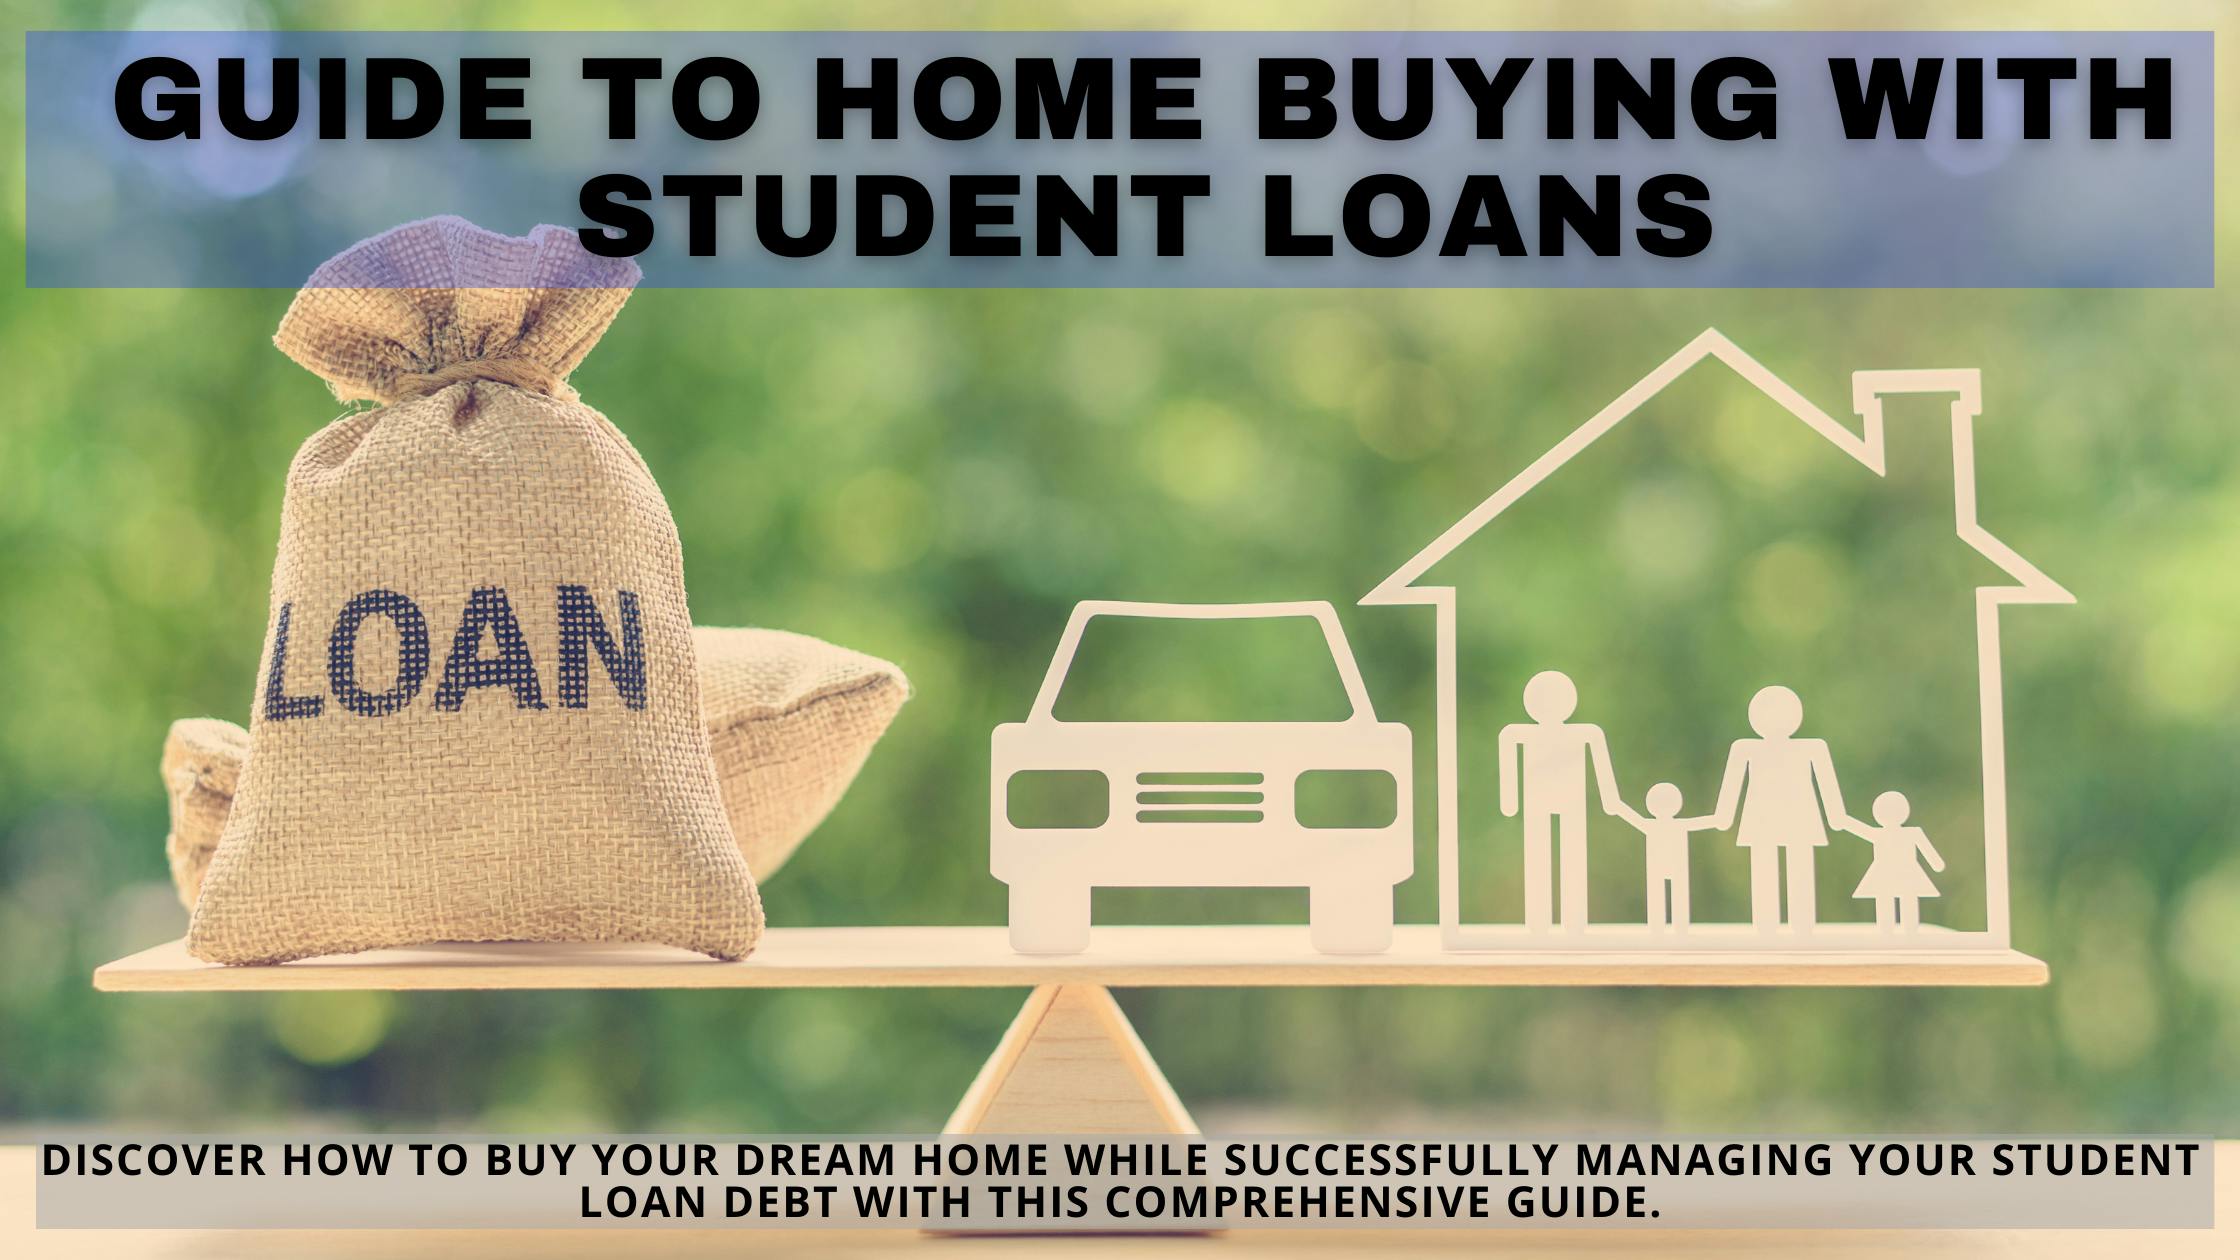 Your Comprehensive Guide to Home Buying with Student Loans